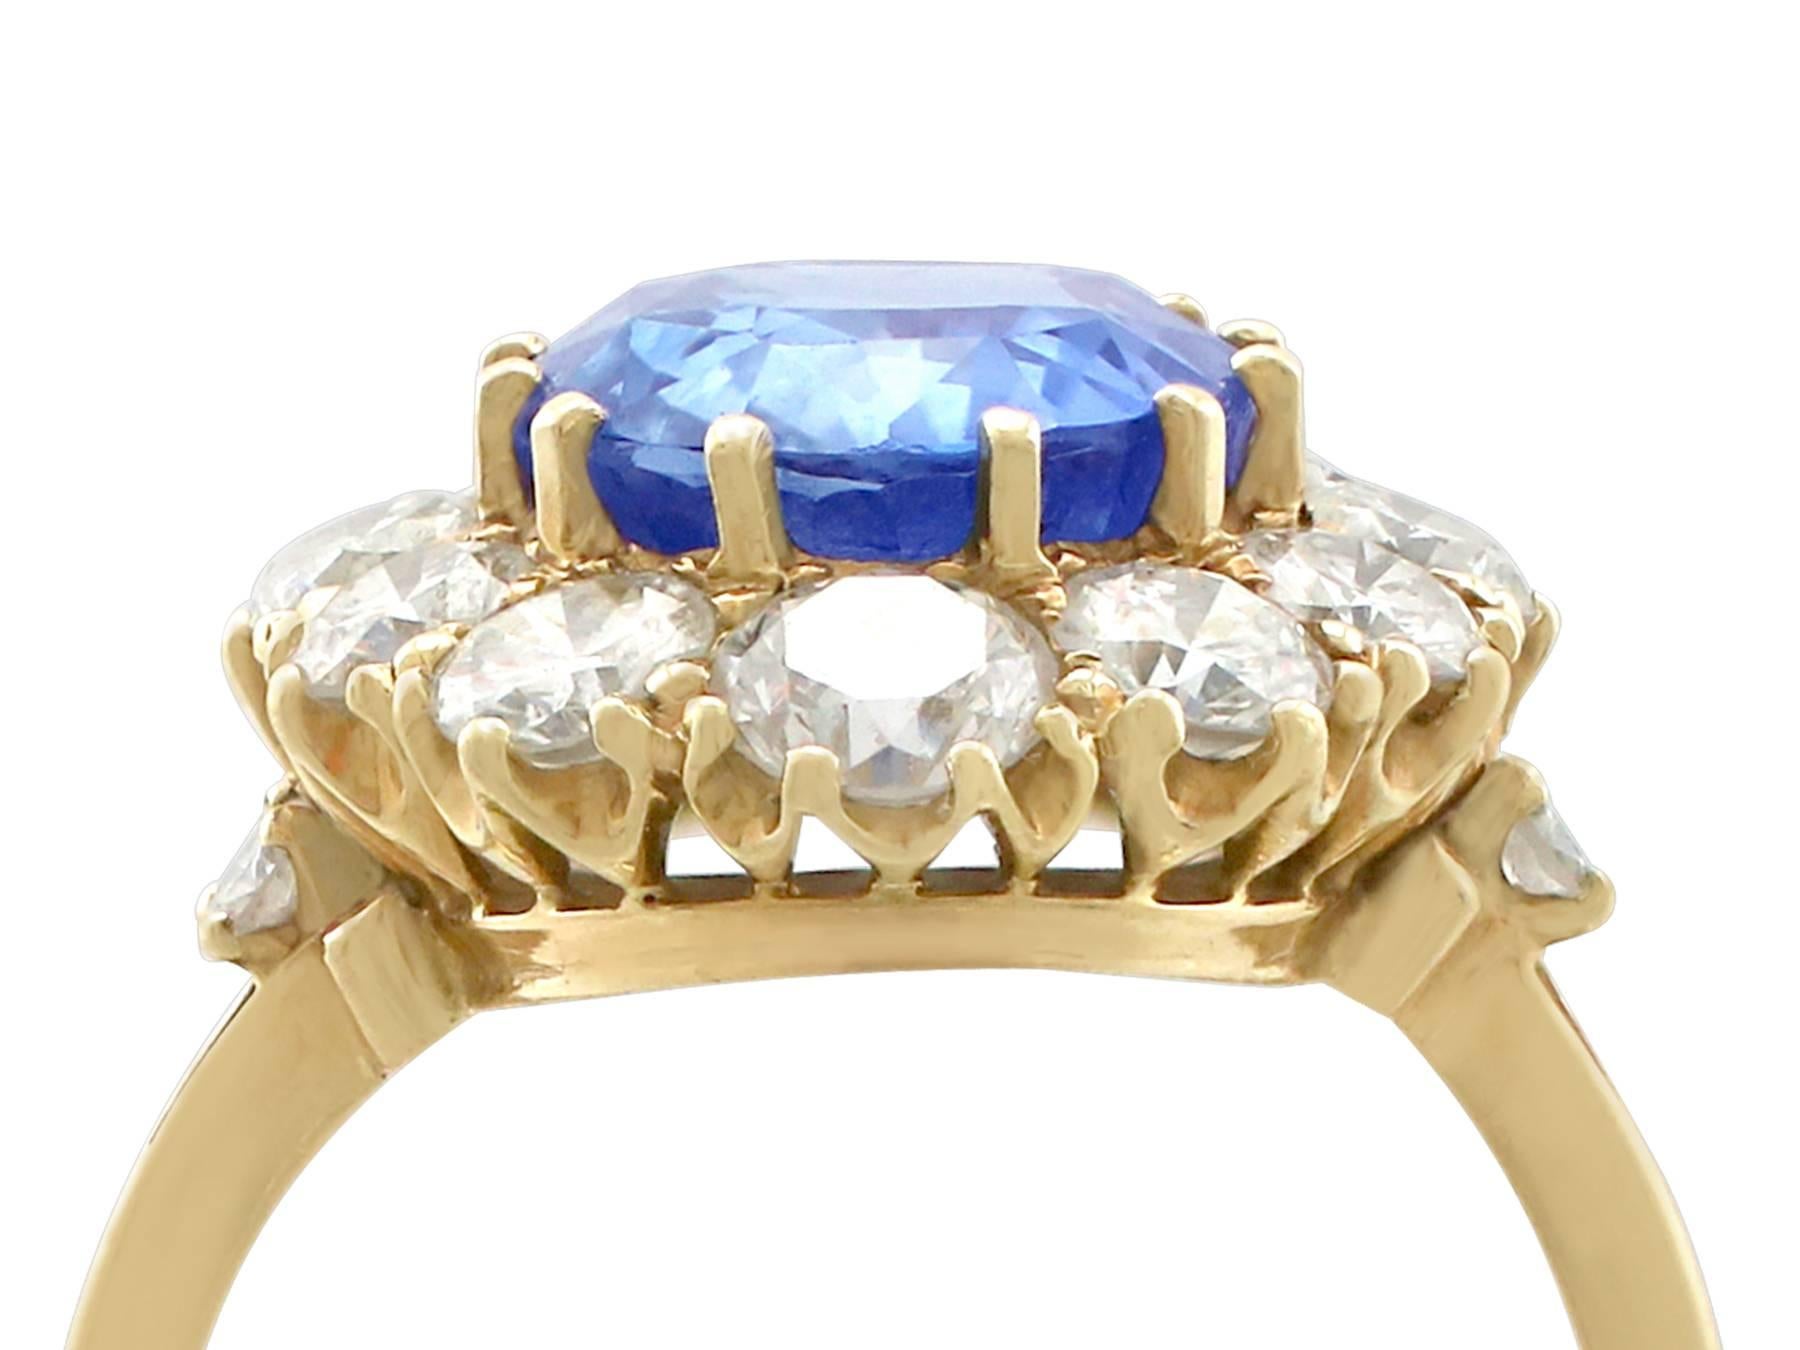 A stunning vintage 4.10 carat Ceylon sapphire and 1.75 carat diamond, 18k yellow gold cluster style dress ring; part of our diverse sapphire jewellery collections.

This stunning, fine and impressive Ceylon* sapphire ring with diamonds has been